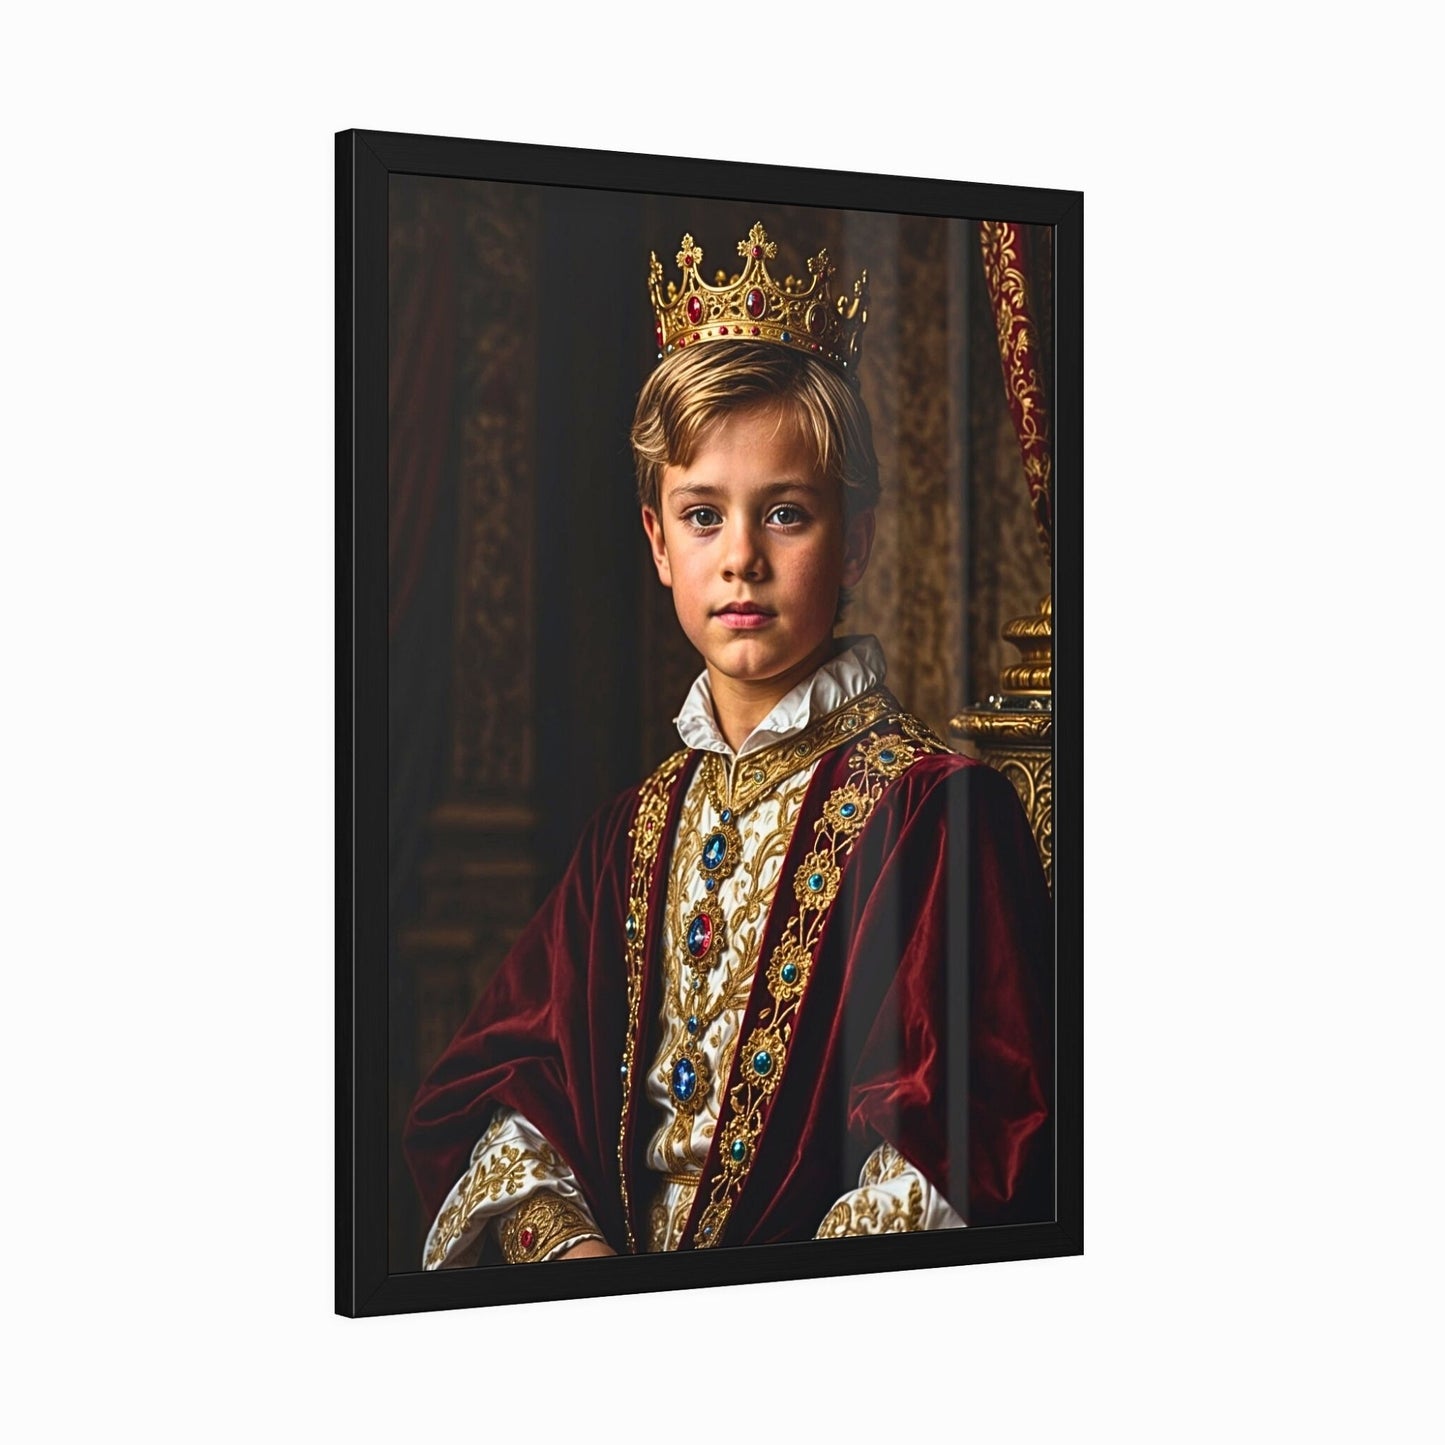 Transform your child's photo into a majestic royal portrait. Our custom kids' portraits are perfect for birthdays and special occasions, capturing the essence of royalty. Personalized and Renaissance-inspired, these portraits make unique and cherished gifts for boys and girls.